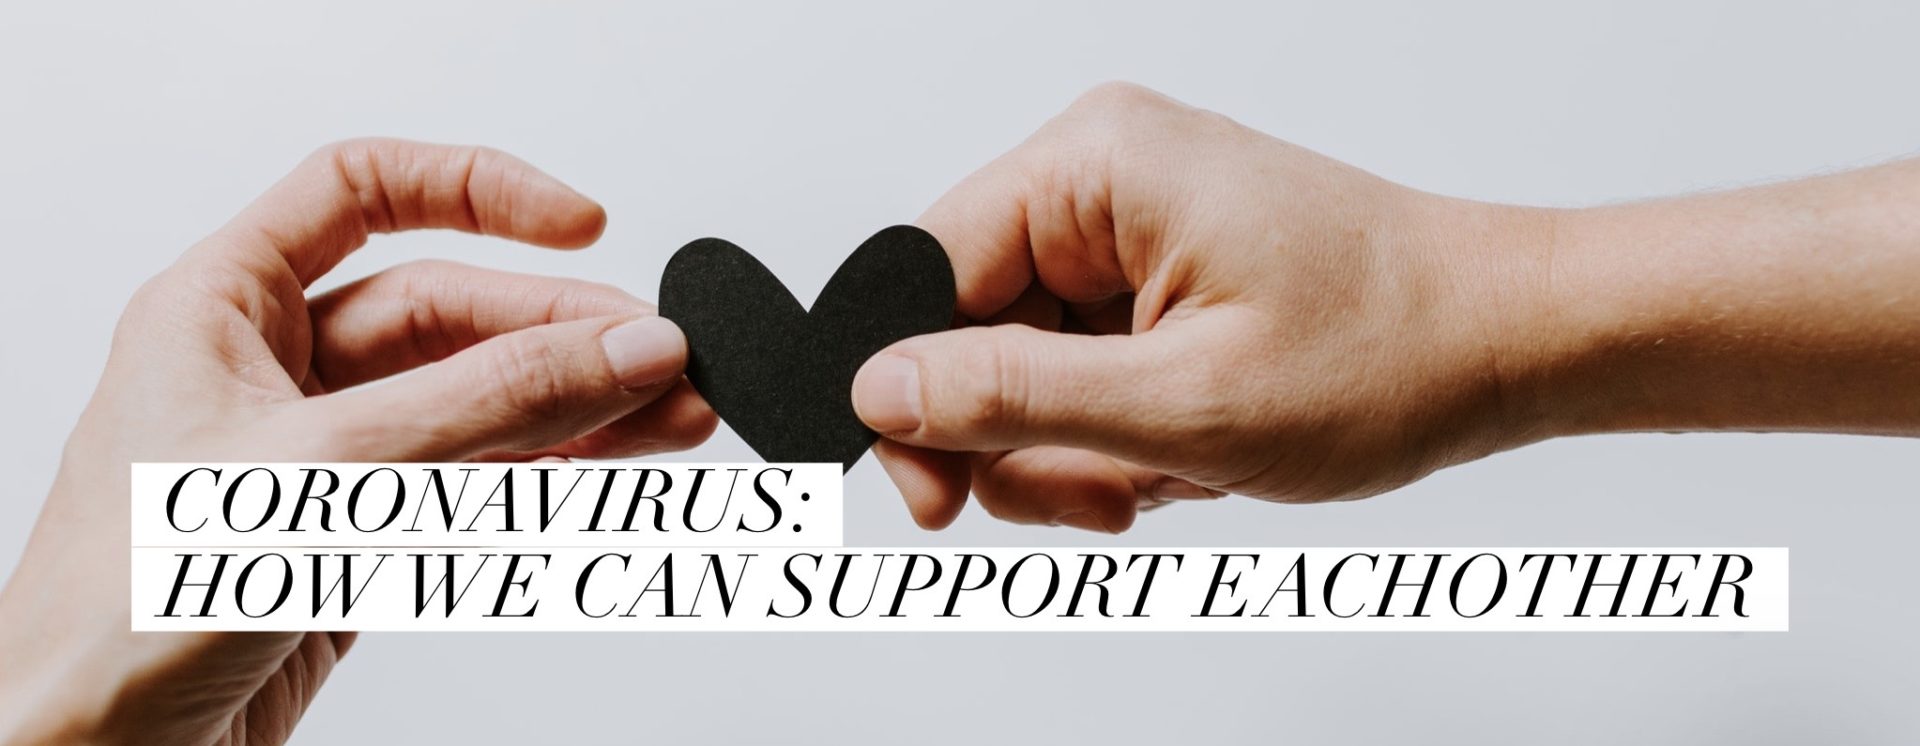 how we can support each other